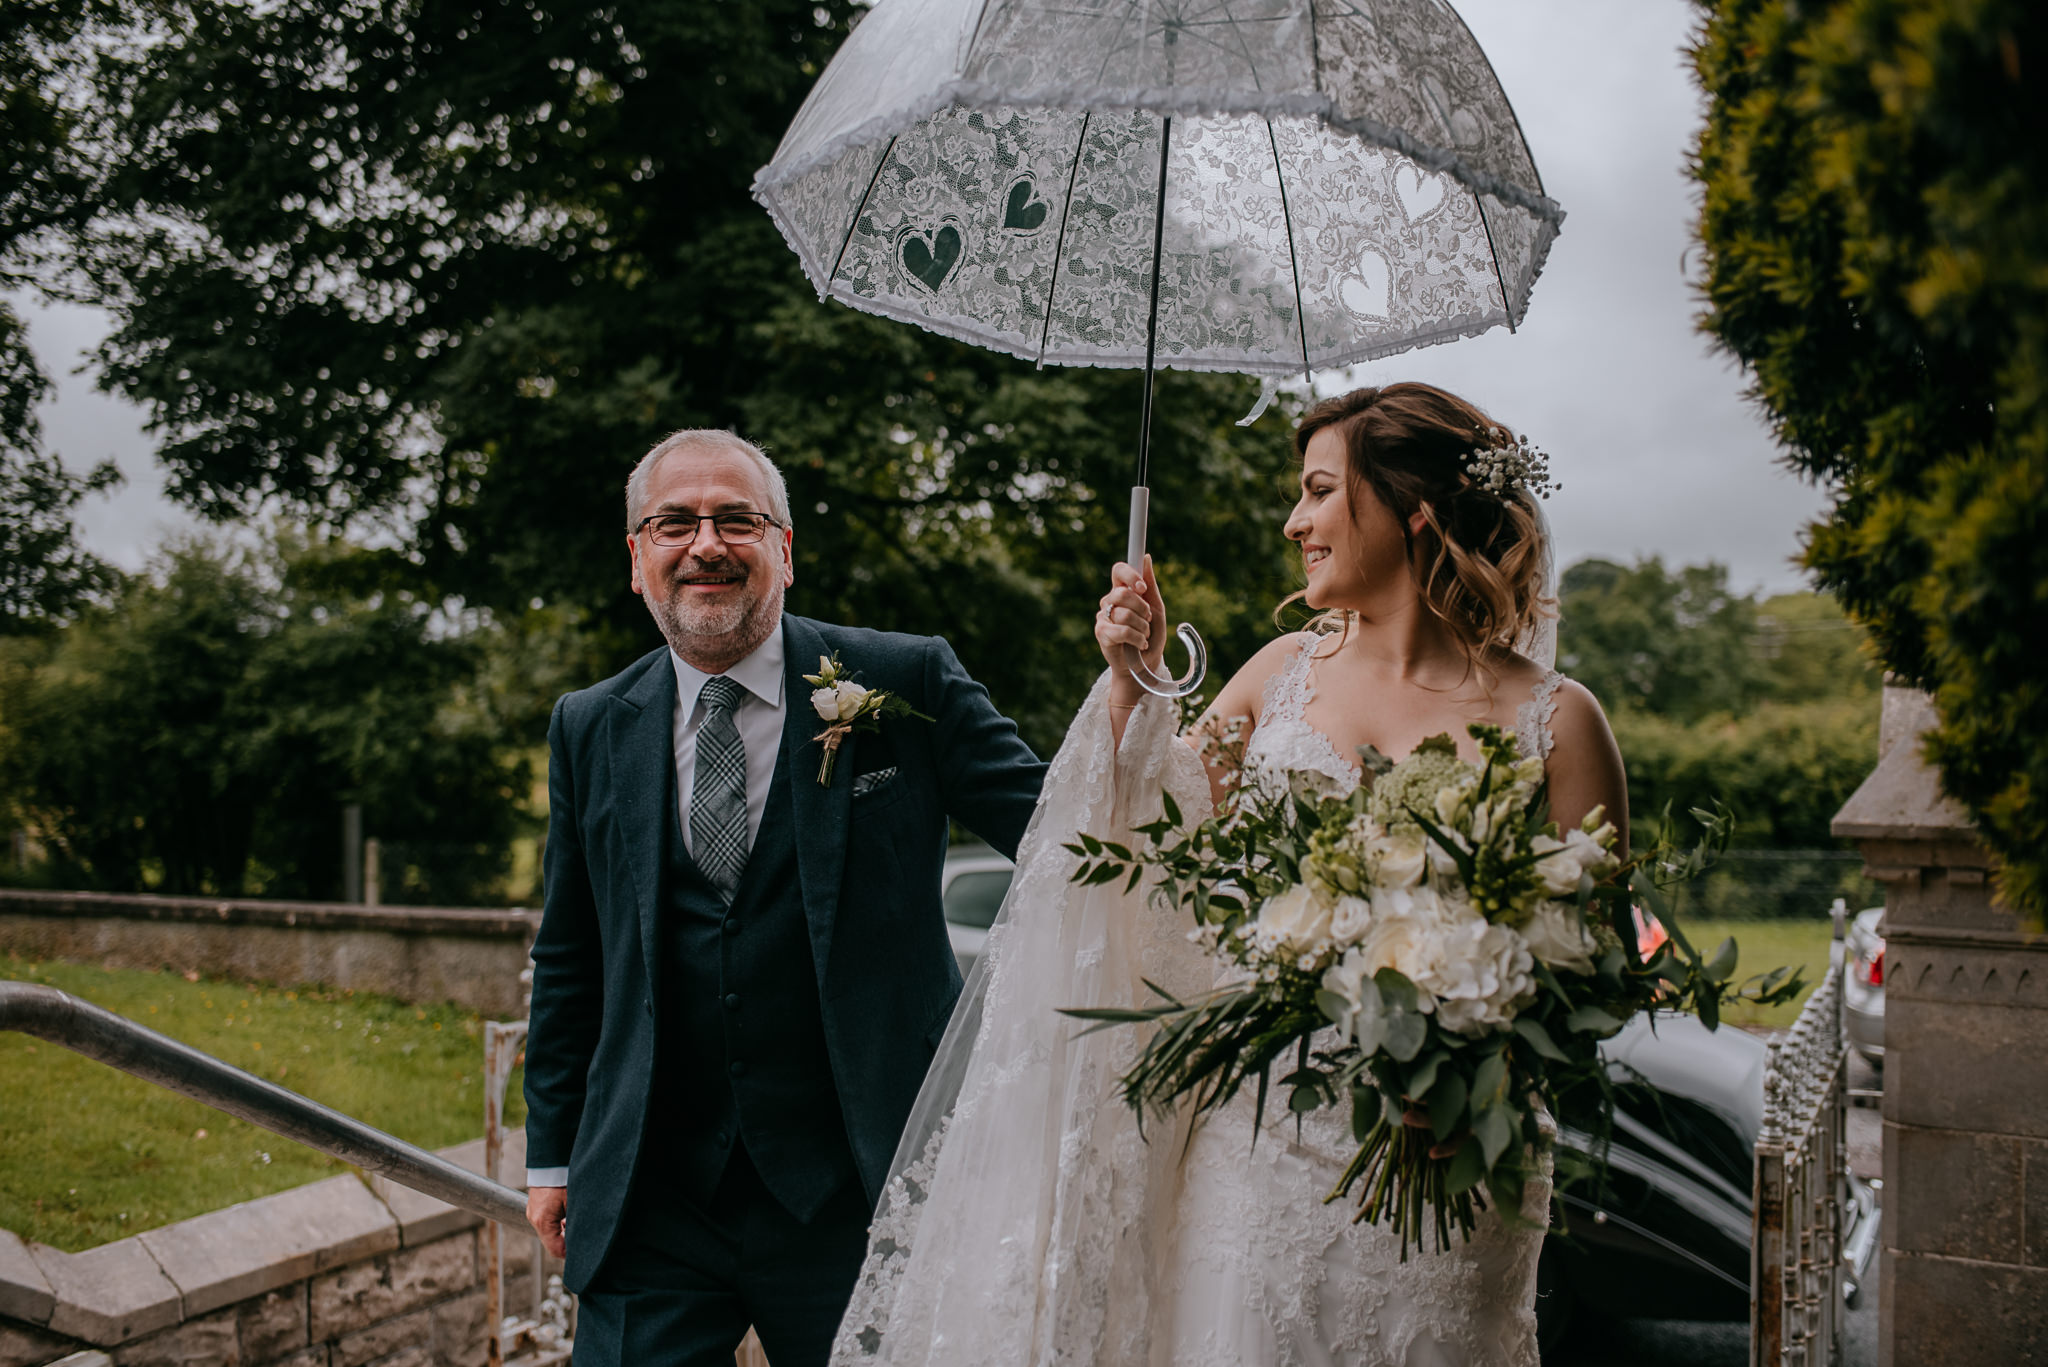  bride and father arrive at ceremony umbrella Northern Ireland Wedding Photographers 